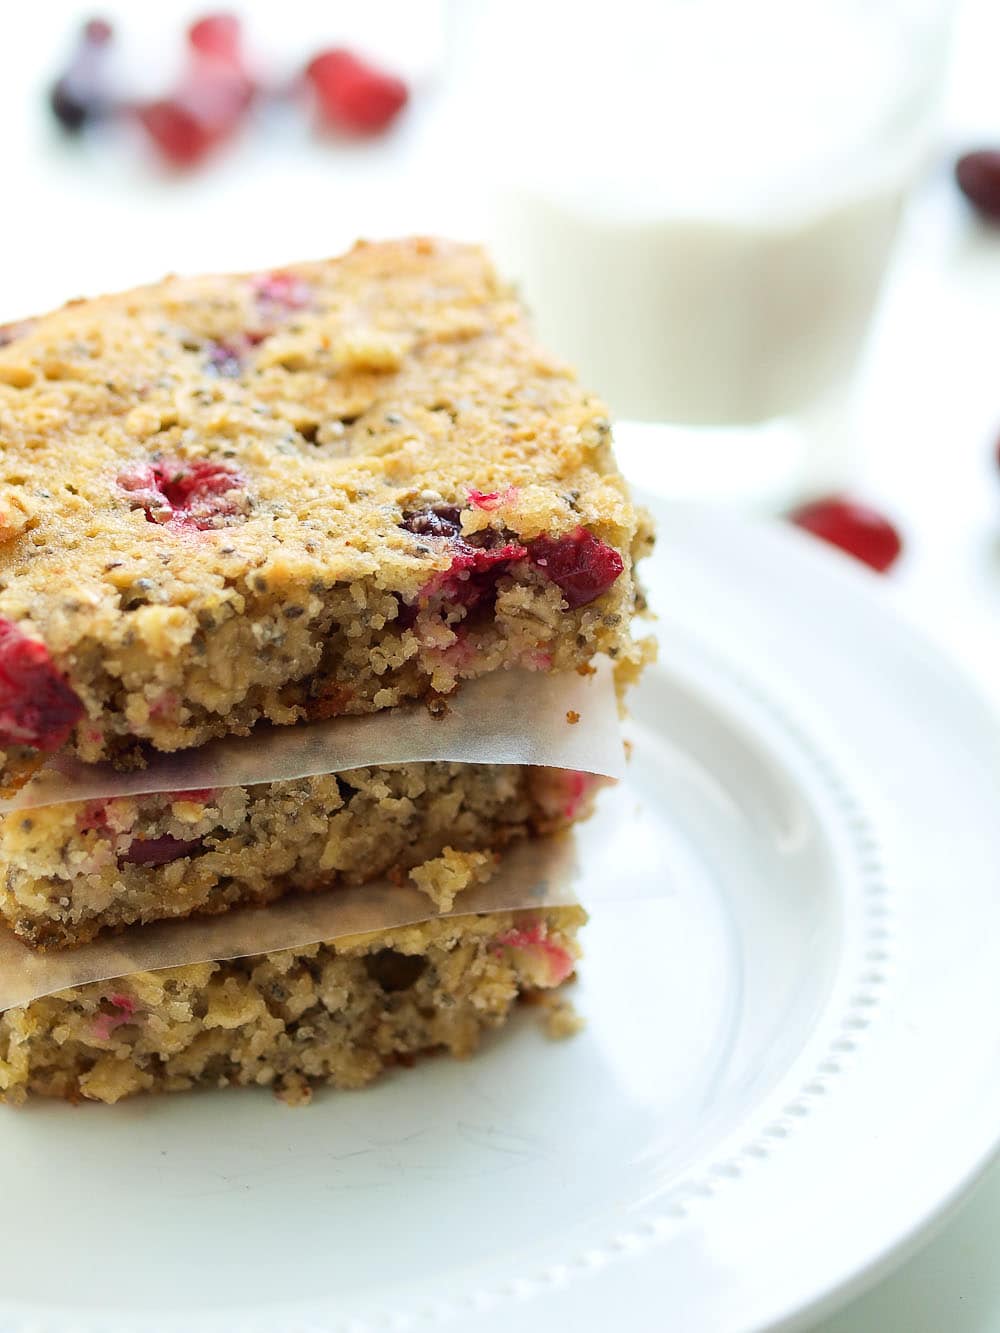 Gluten Free Almond Oat Cranberry Bars. These quick, easy, and healthy bars are great for breakfast or an after school snack! Add chocolate chips to bring them to a dessert level!